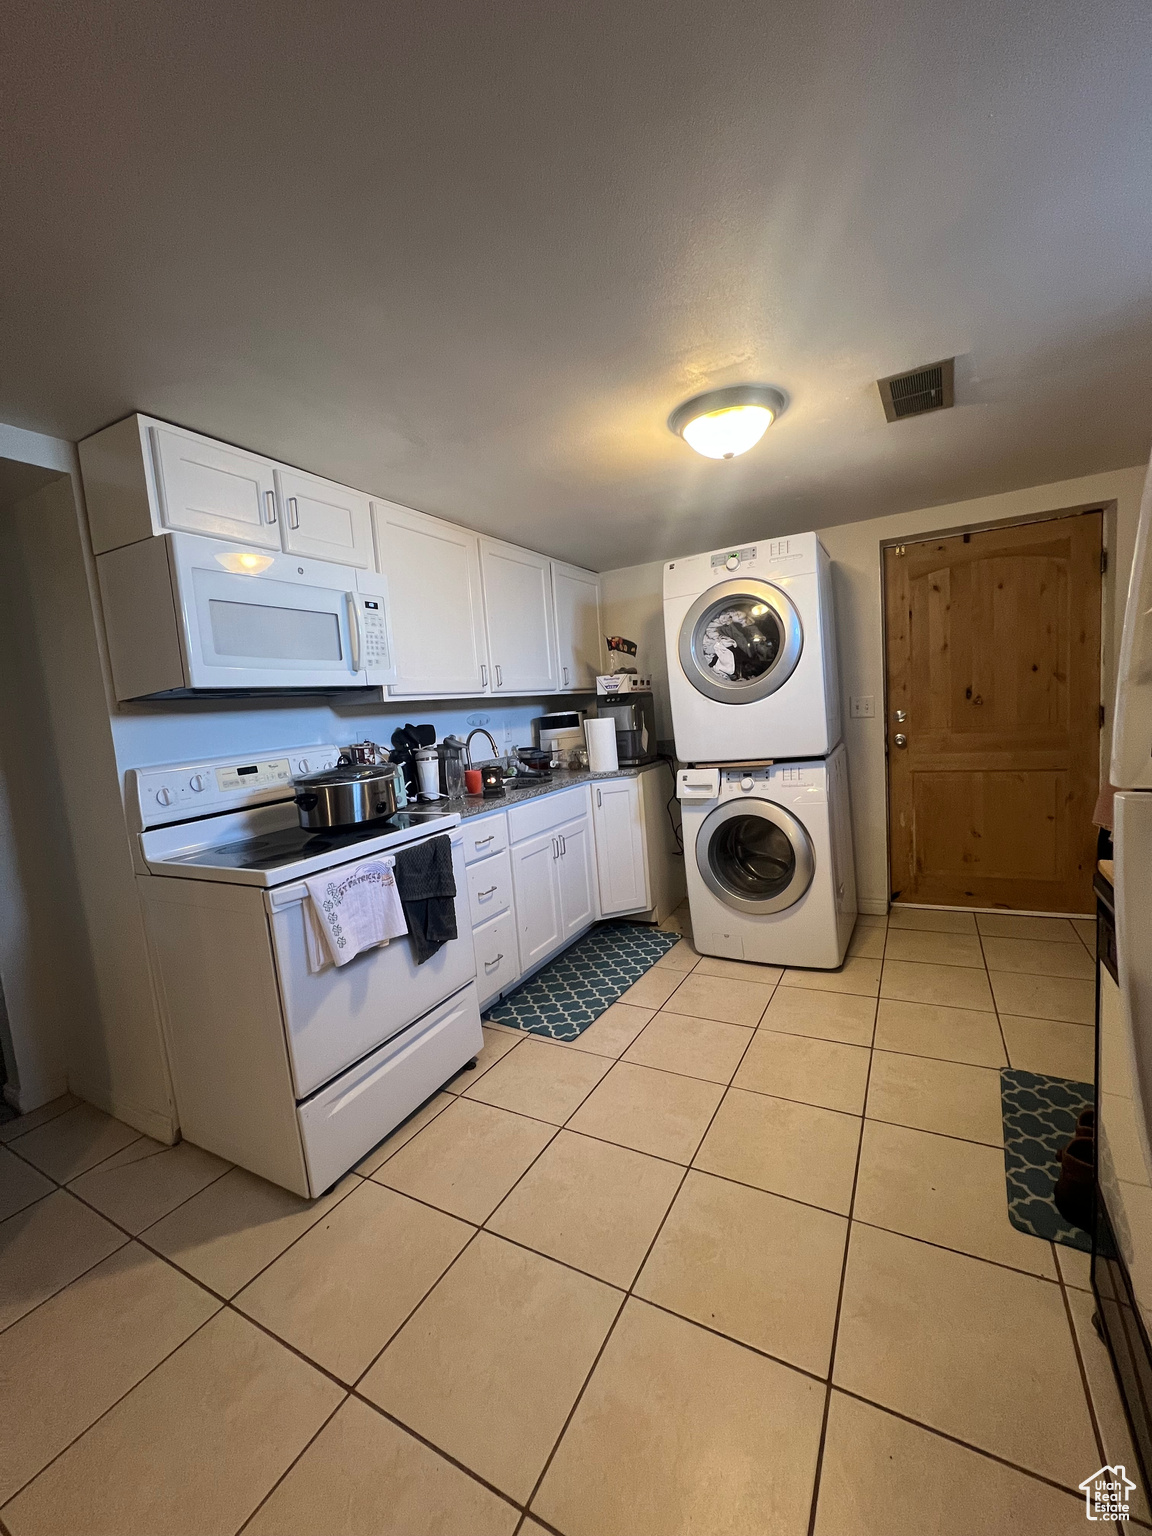 Kitchen with white appliances, light tile flooring, stacked washer and dryer, and white cabinets